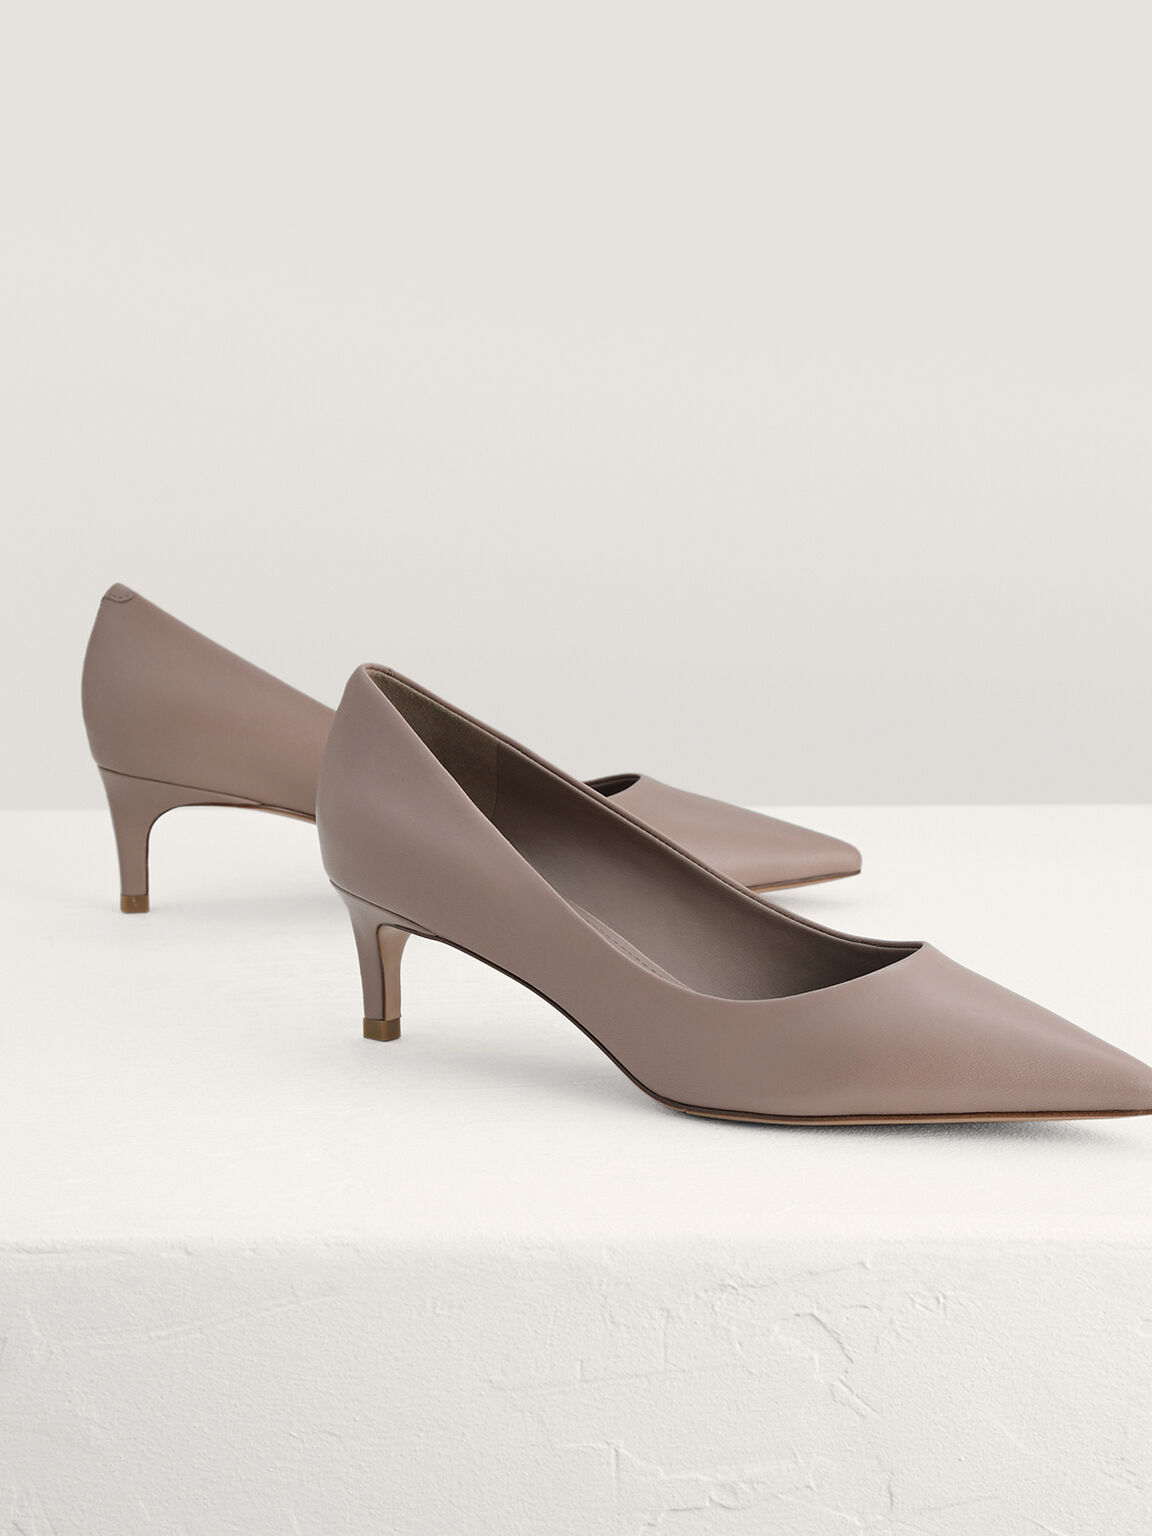 Leather Pointed Pumps, Taupe